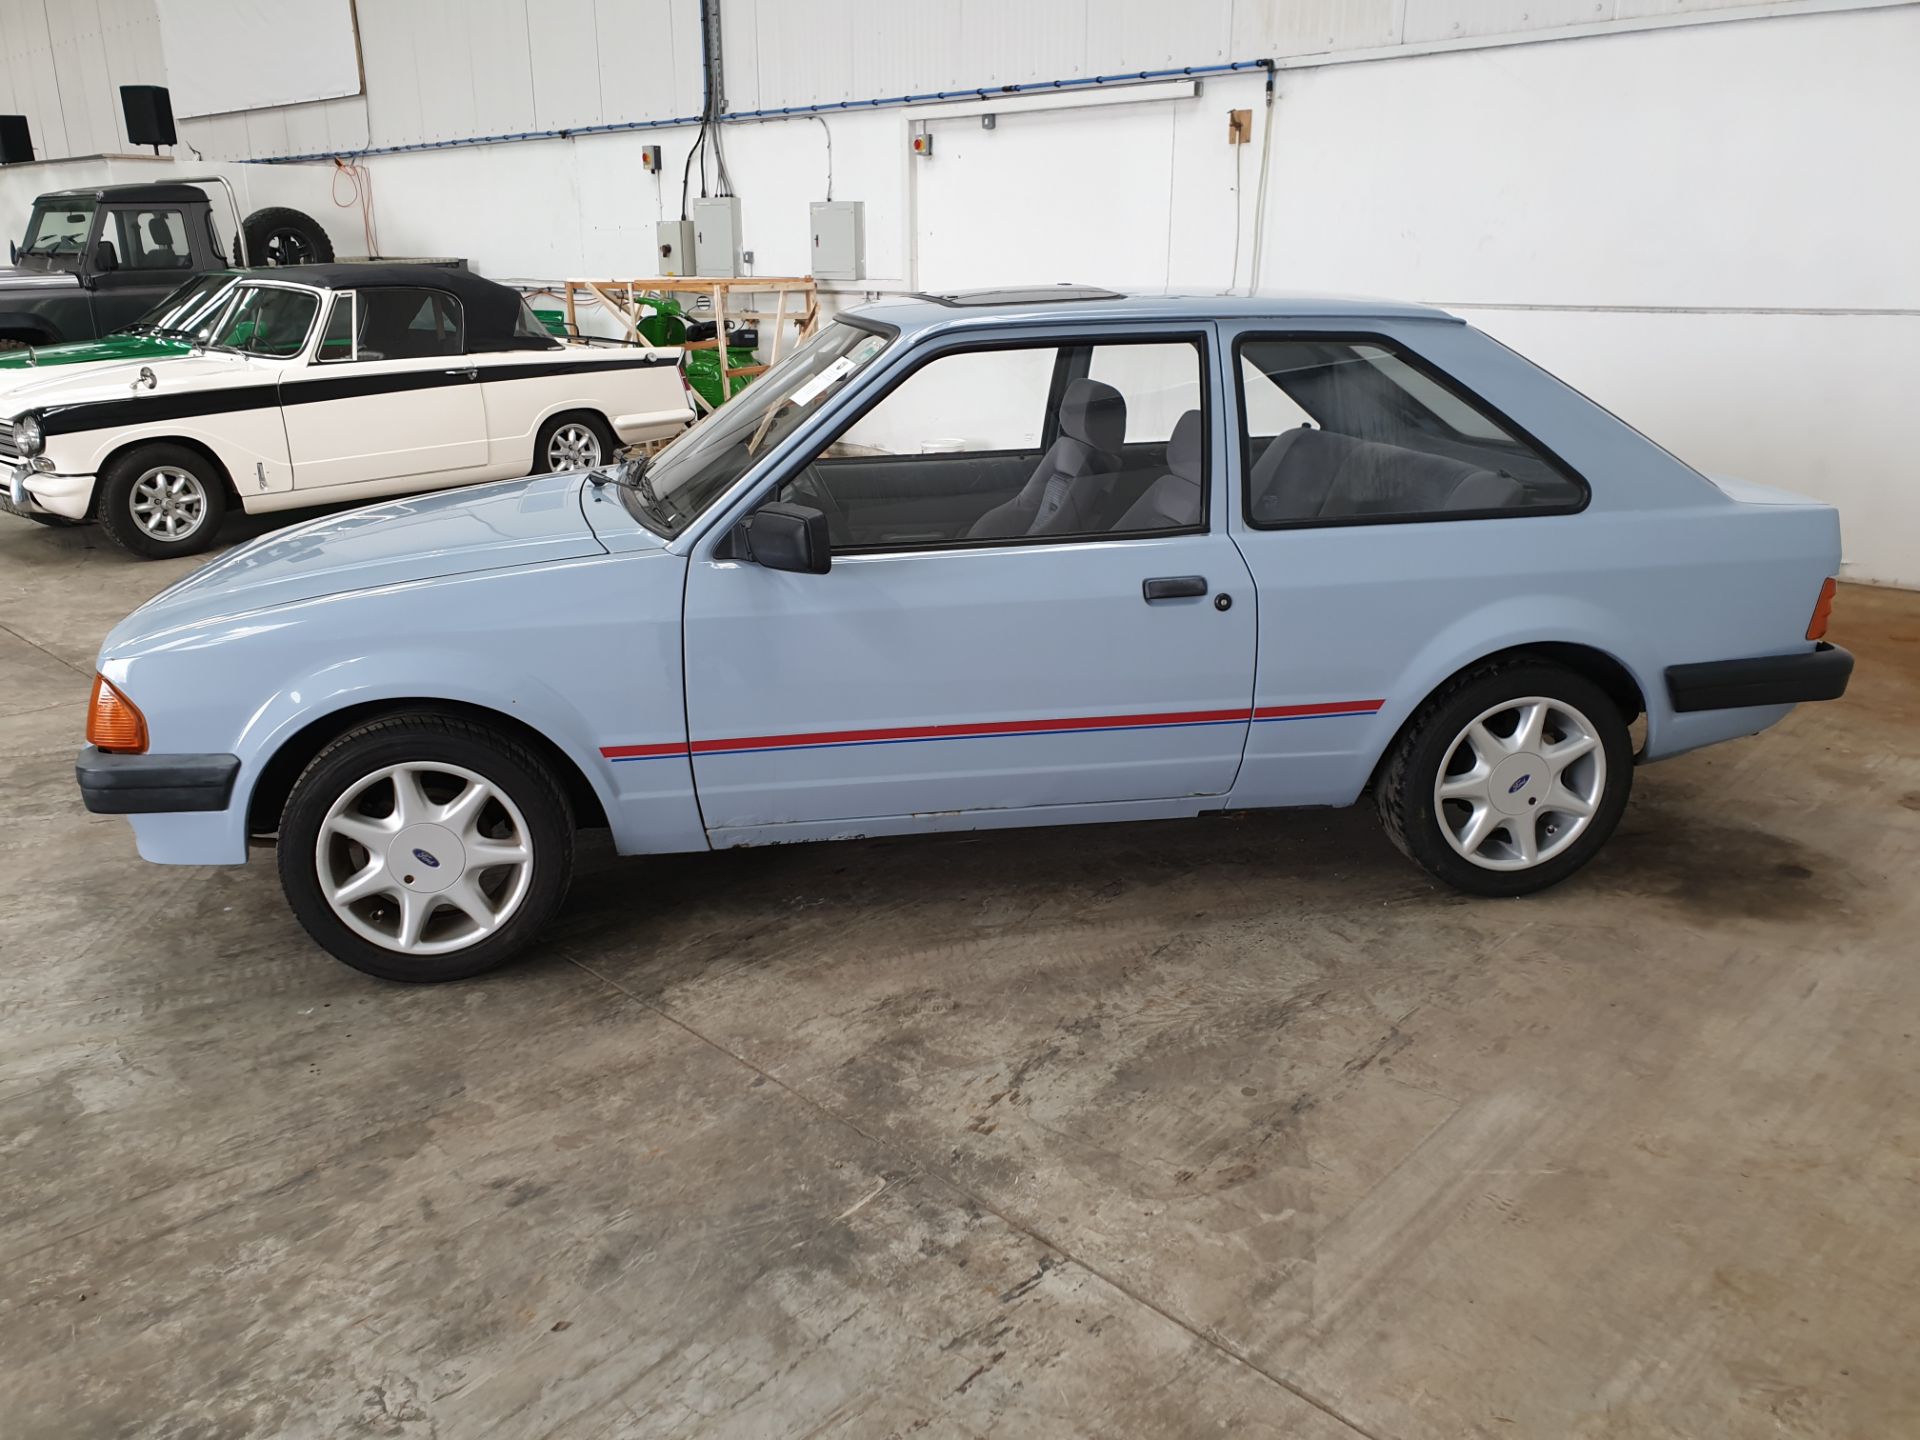 1984 Ford Escort 1100 3dr - Image 6 of 14